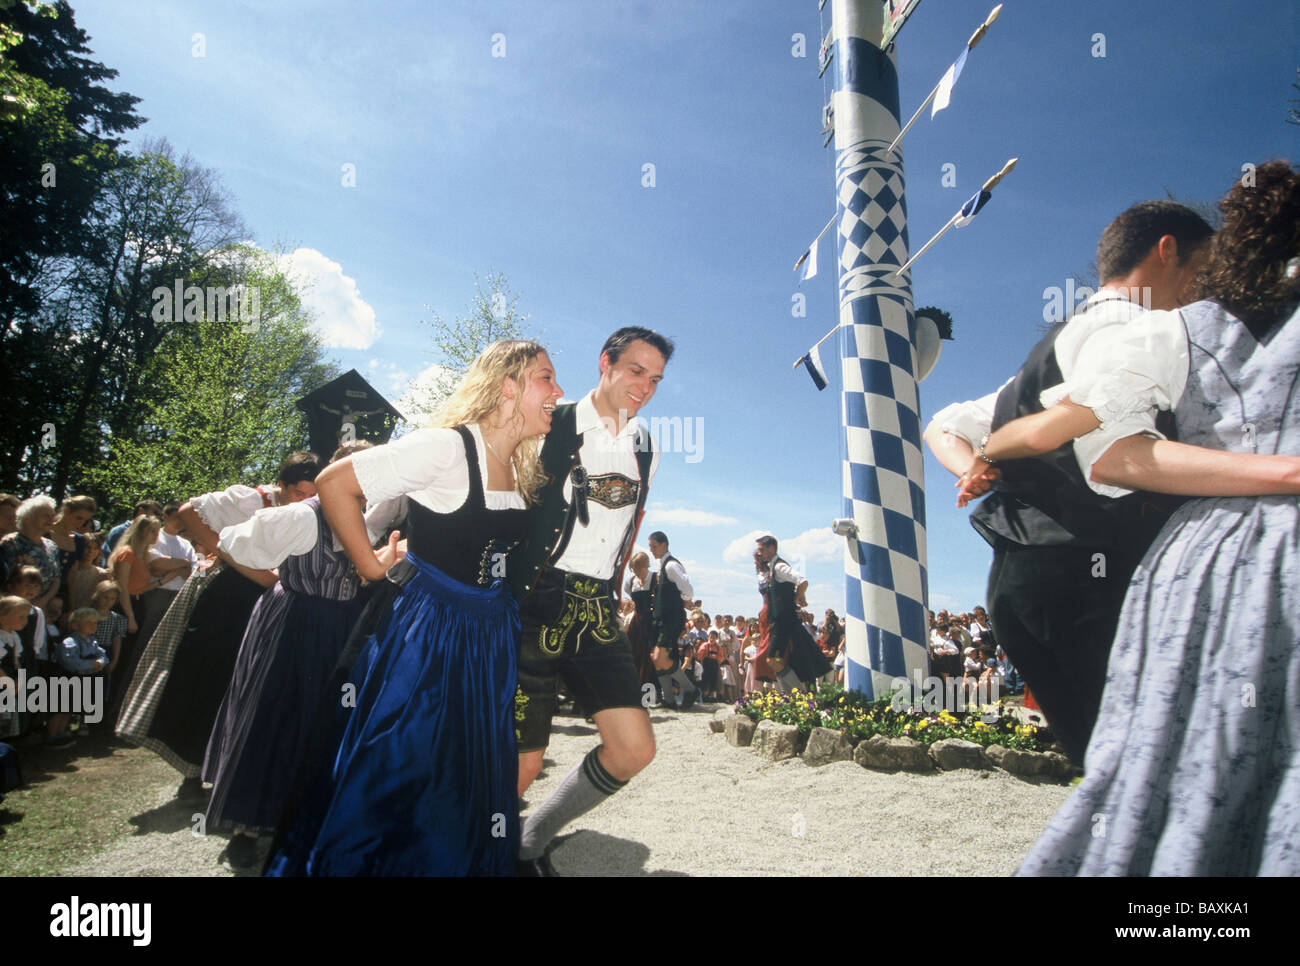 Young men and women dancing around the maypole at the Maypole festival in Holzhausen, Bavaria, Germany Stock Photo